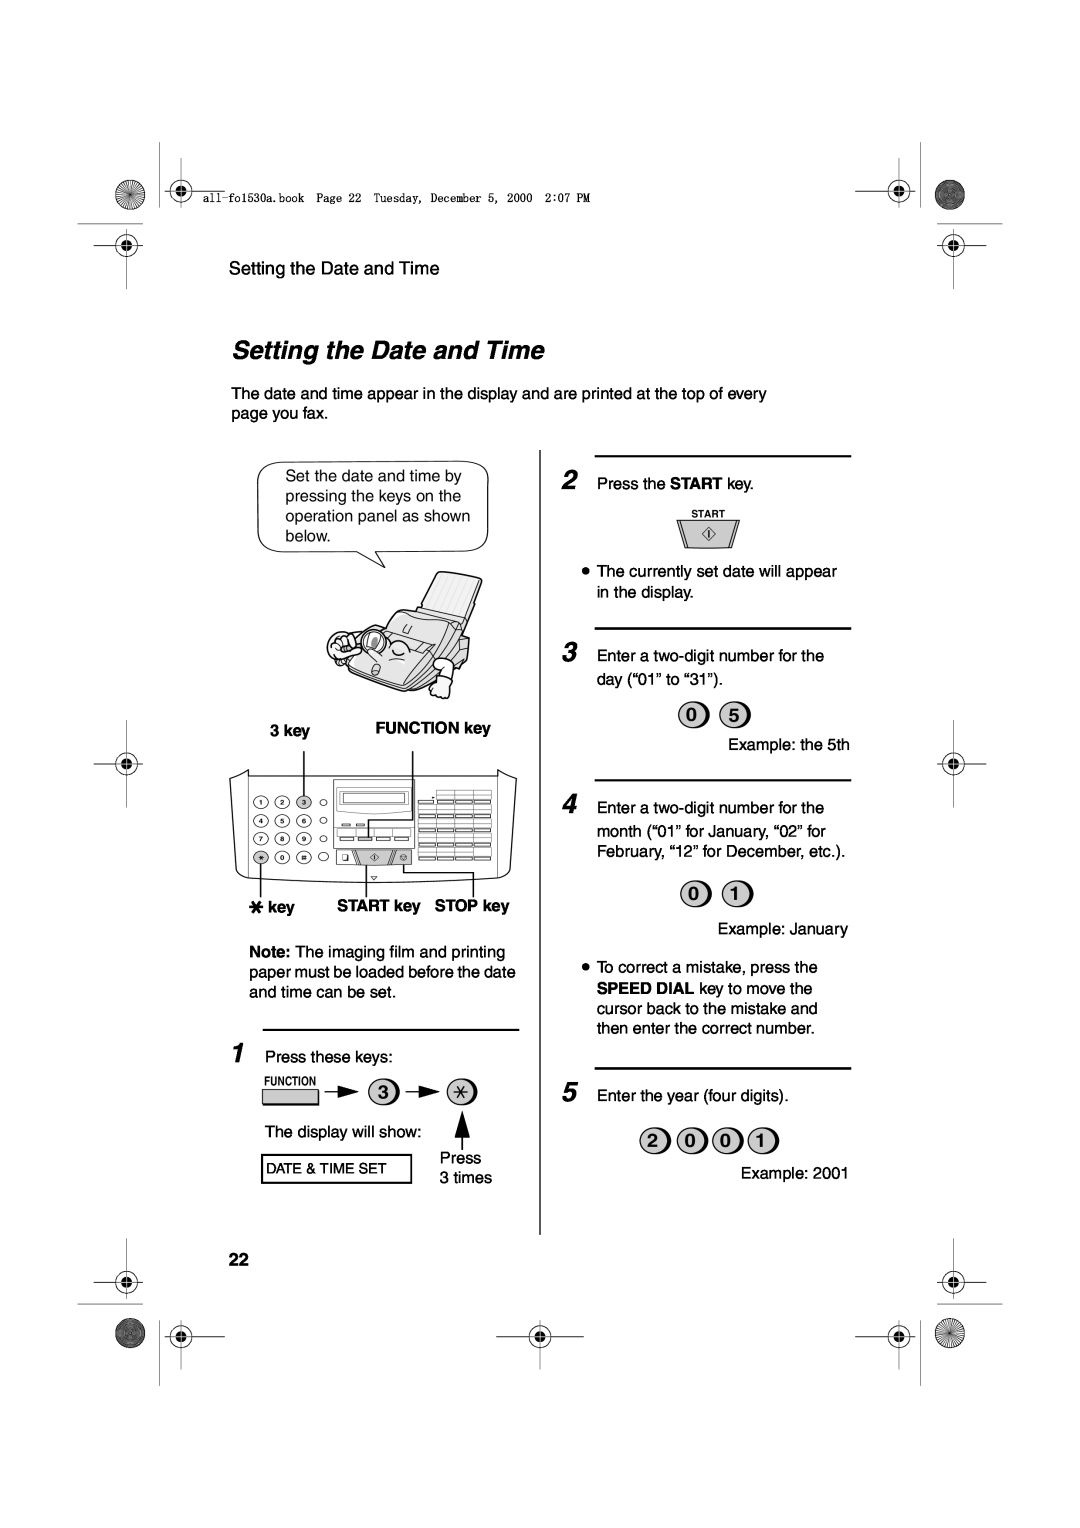 Sharp FO-1530 operation manual Setting the Date and Time, 2 0 0, 3 key, FUNCTION key, START key STOP key 